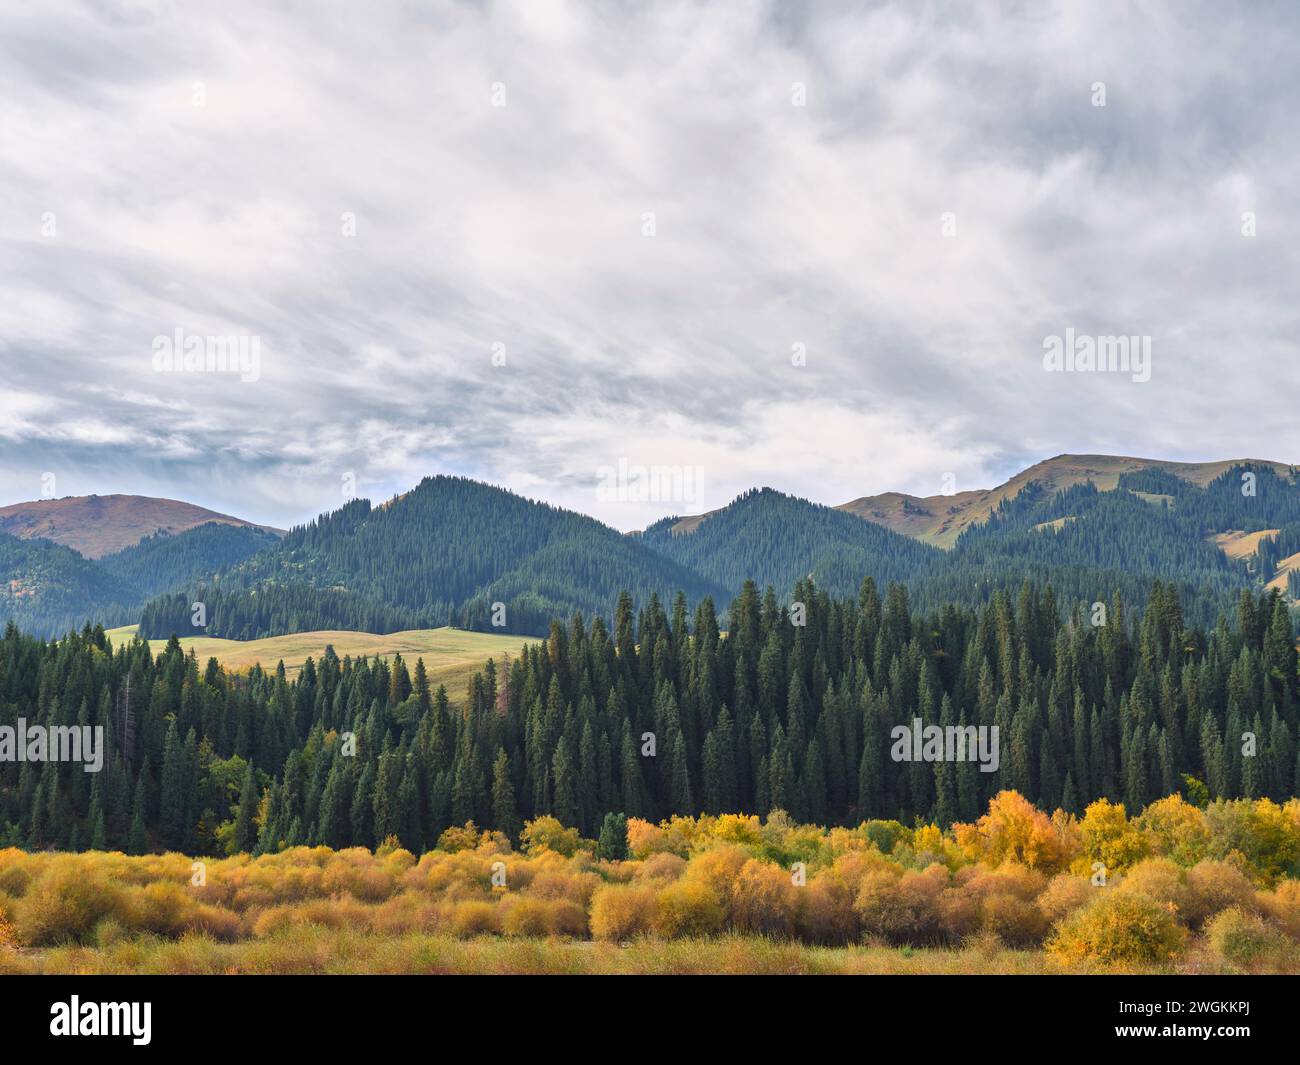 autumn scenery with mountain, forest, trees and bushes in xinjiang, china Stock Photo